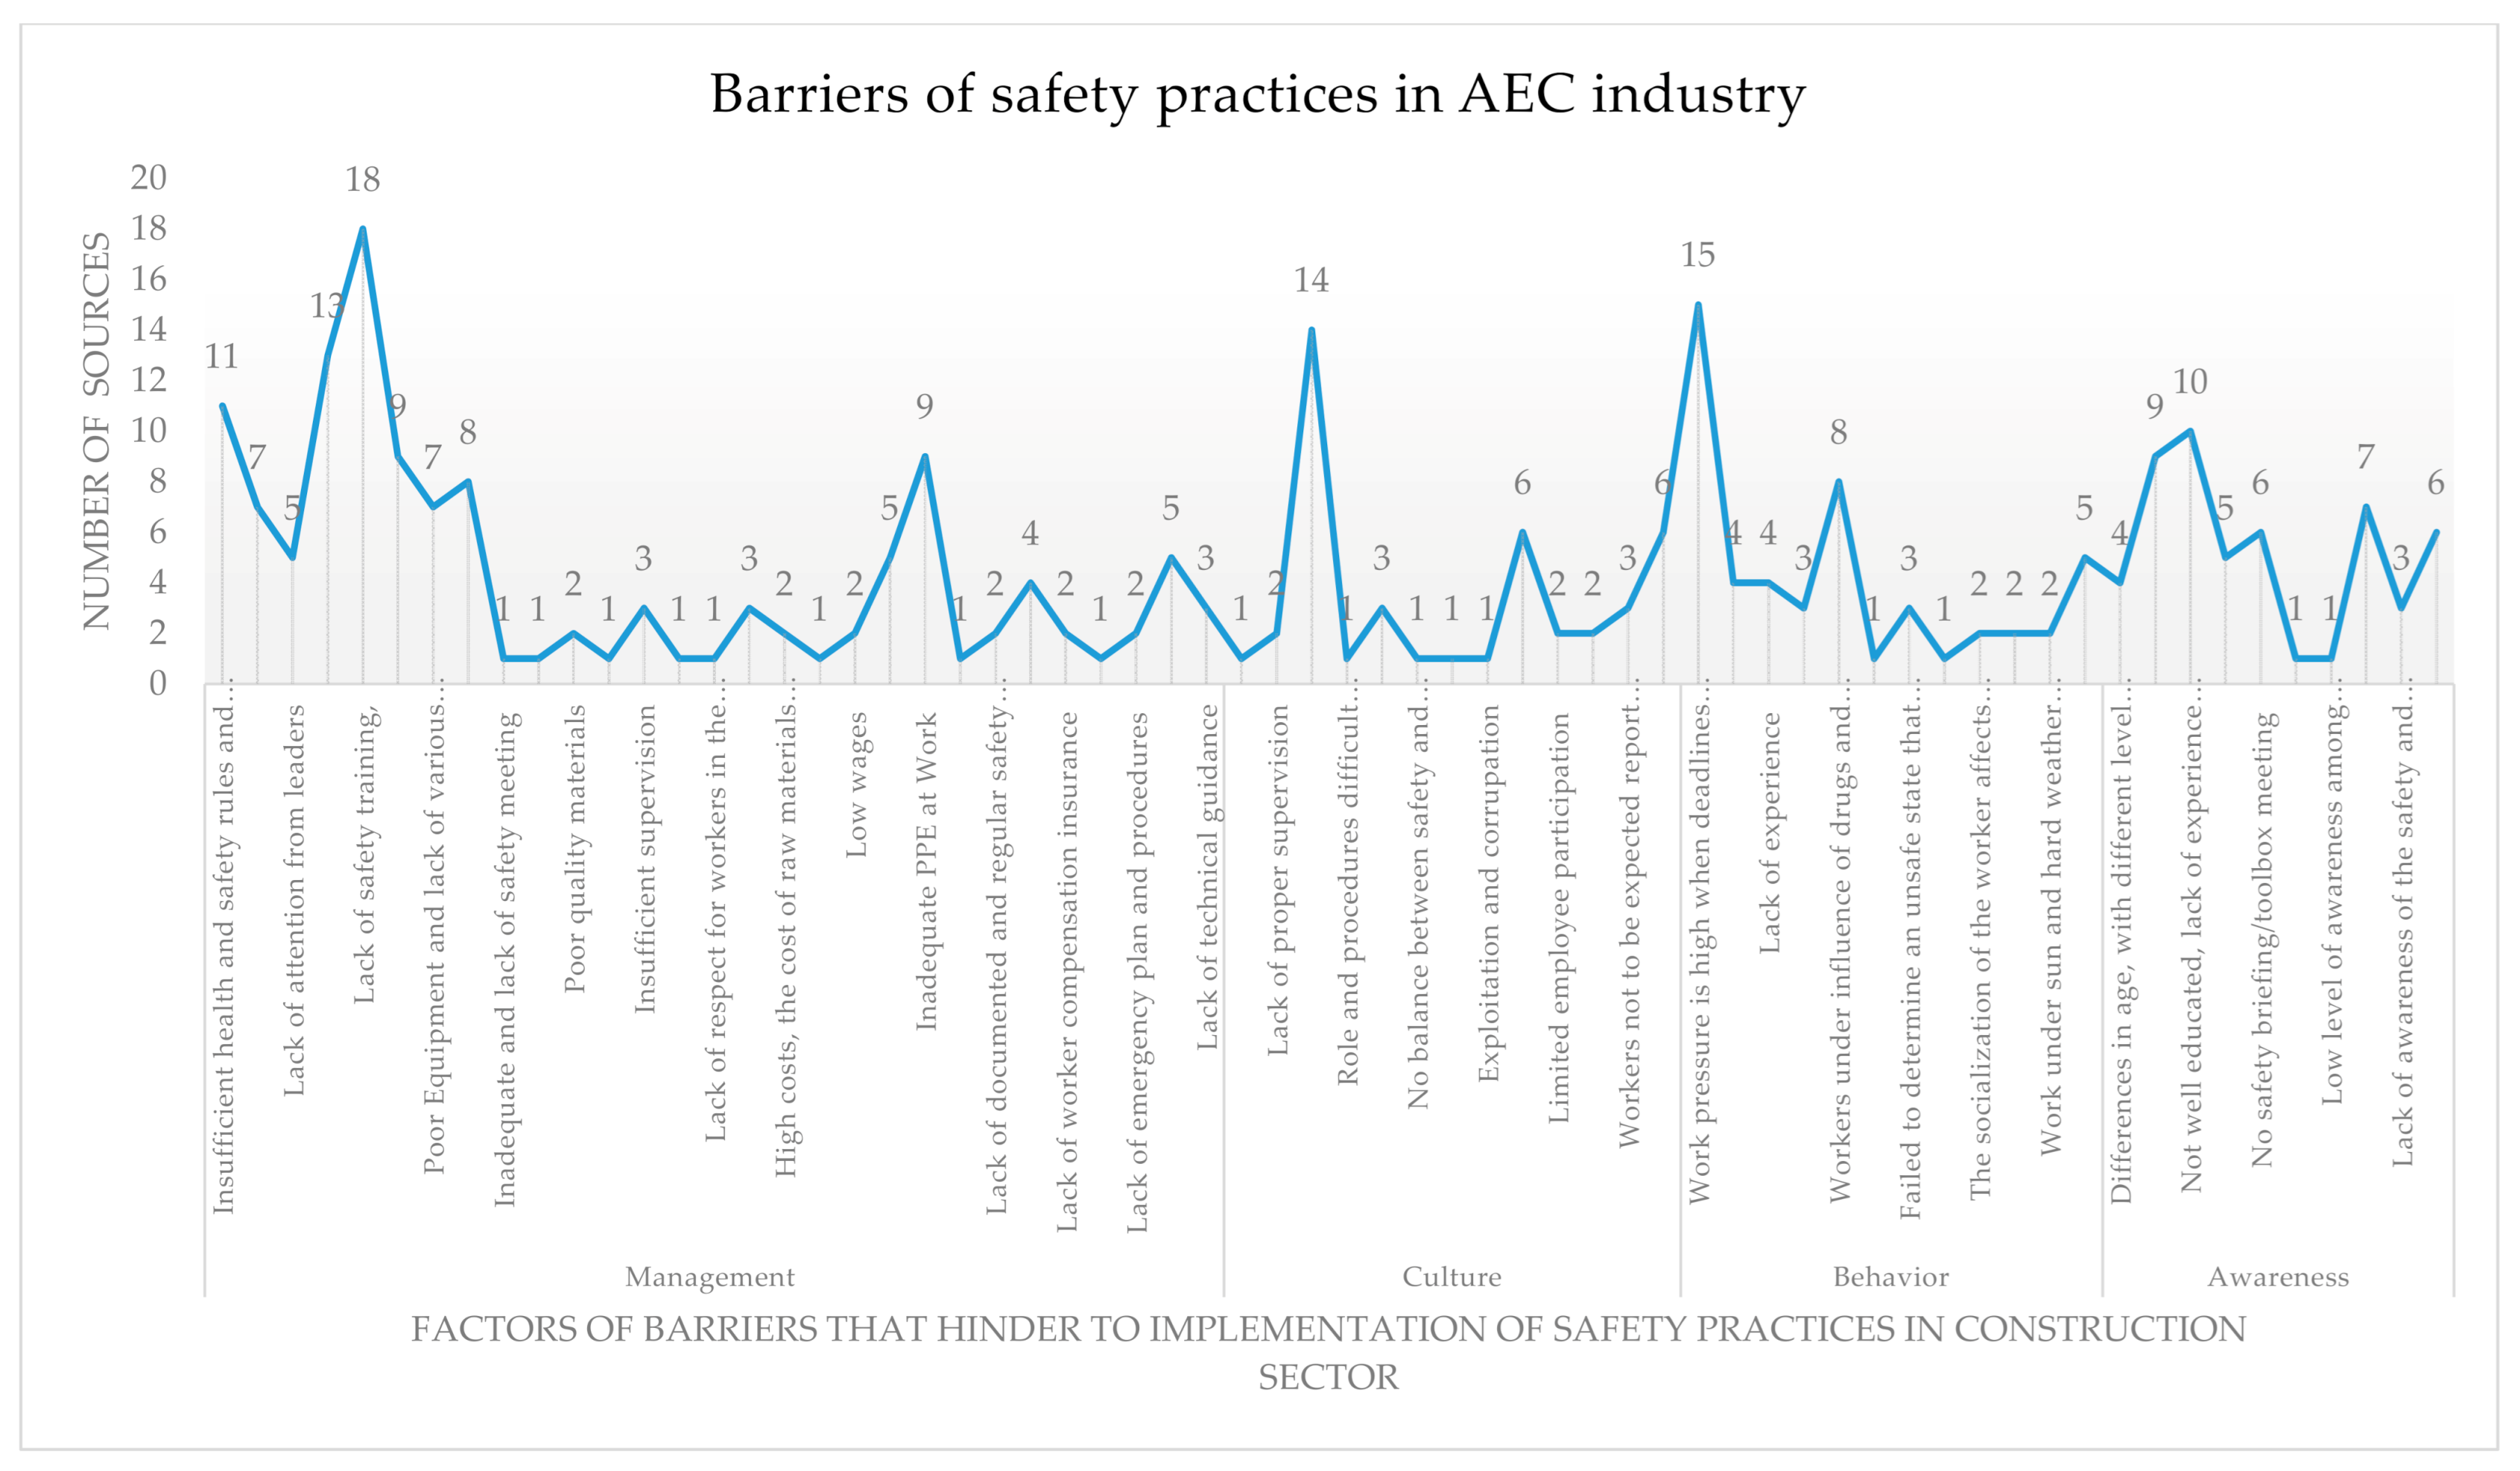 Sustainability | Free Full-Text | Safety Barriers Identification,  Classification, and Ways to Improve Safety Performance in the Architecture,  Engineering, and Construction (AEC) Industry: Review Study